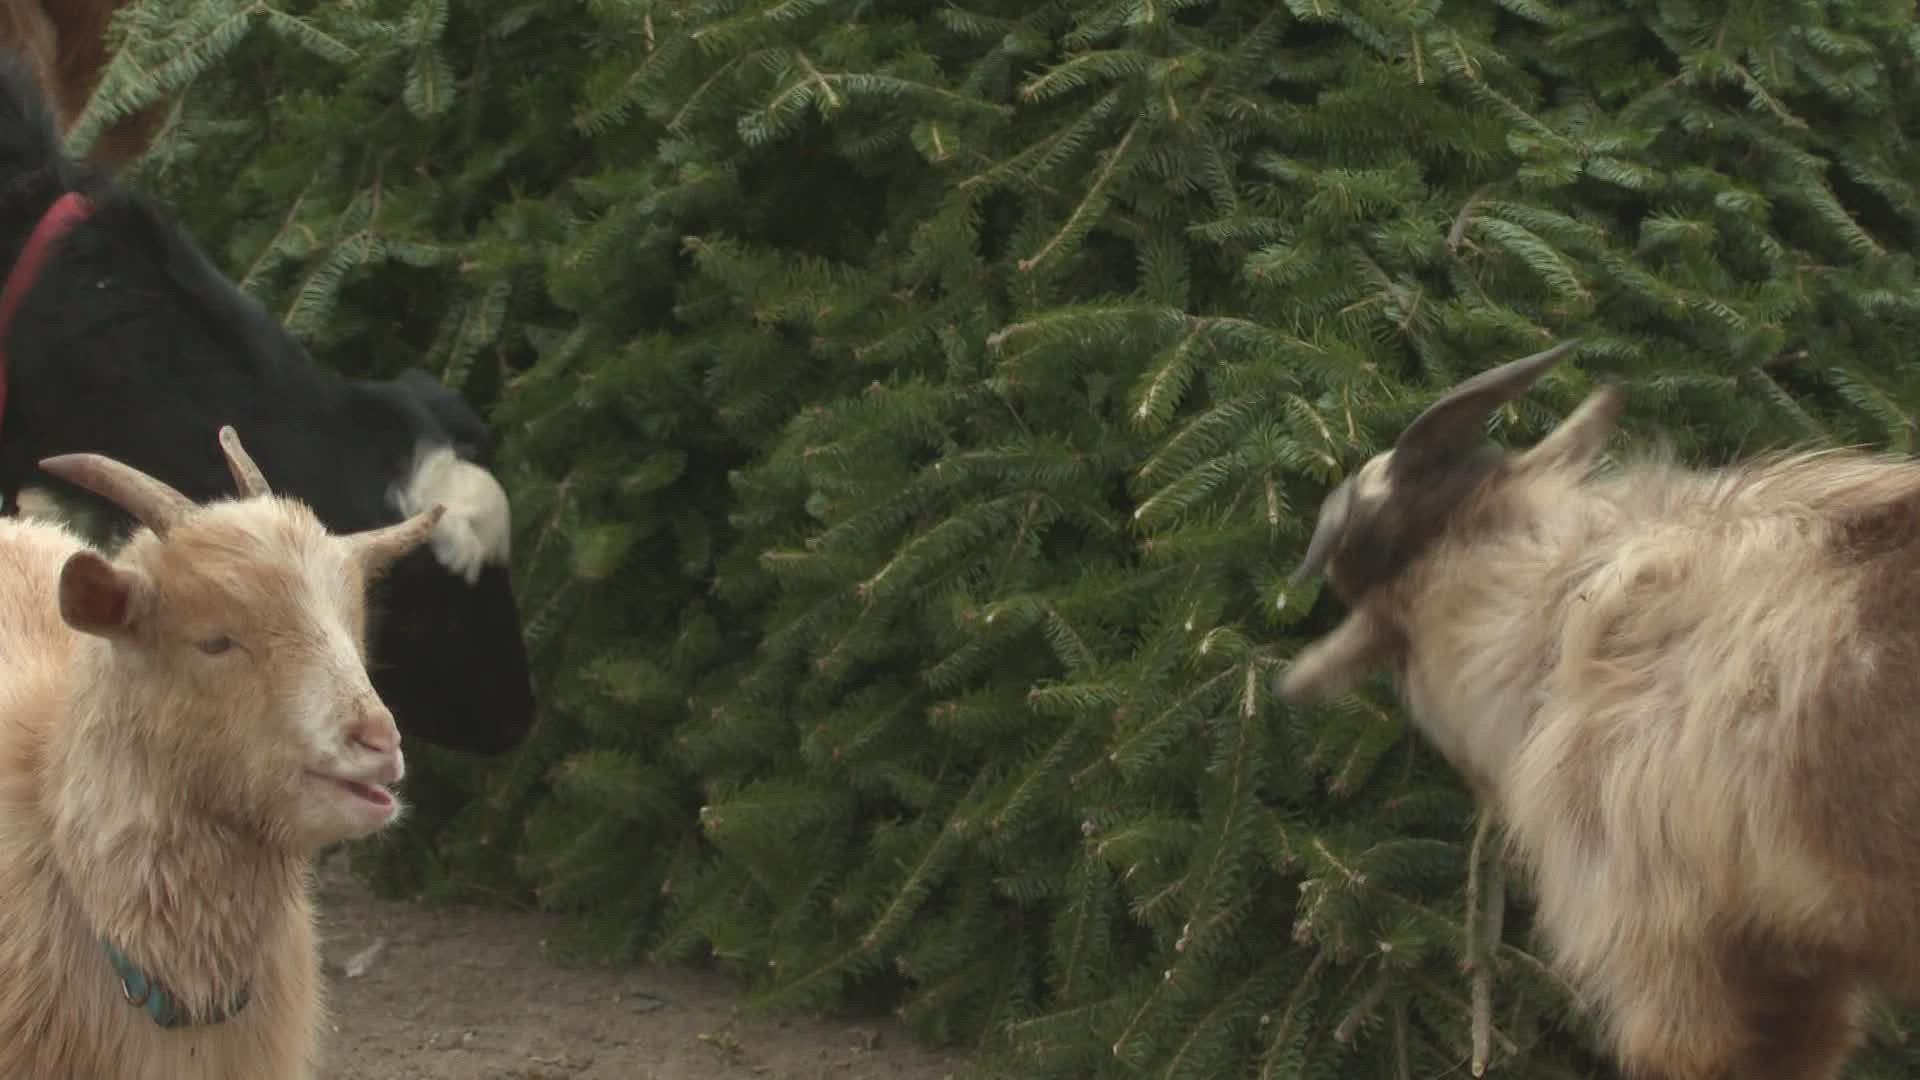 Across Maine, farms and animal rescues can make good use of donated Christmas trees.